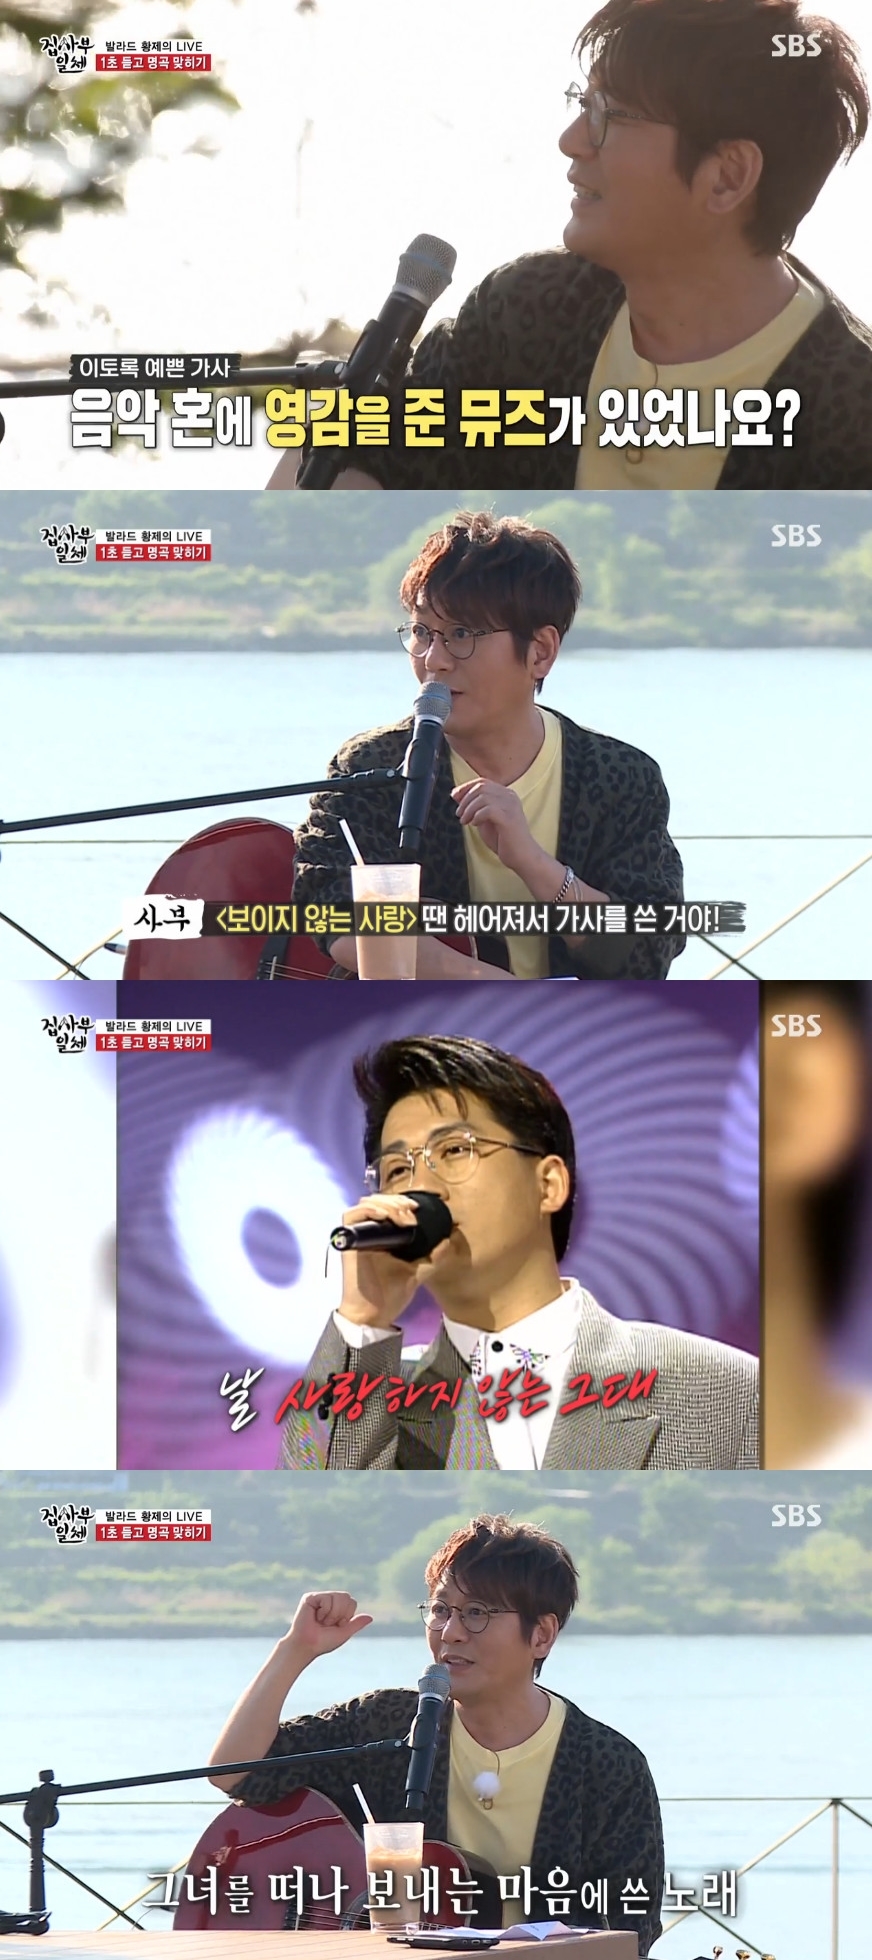 Singer Shin Seung Hun has confessed to the love affair related to the hit song.SBS All The Butlers broadcast on May 17 was decorated with Shin Seung Hun.Shin Seung Hun was a star who wanted to invite Master once by All The Butlers members.Lee Seung-gi said, I am glad to be with Legend today.Shin Seung Hun is considered a legend in the music industry, as Lee Seung-gi says.Shin Seung Hun, who debuted his first full-length album You in the Smile in 1990 and celebrated his 30th anniversary this year, is like that first feeling, invisible love, just youre a little higher than me, Dont ring me, Turn on the radio, Like someone in legend, Mommy, I Believe (I-Billyb), The Butterfly Effect and others, and was loved by the public.In particular, Shin Seung Hun ranked first in the Guinness Book of Records for 14 consecutive weeks with his second album Invisible Love.In addition, he has become a legendary national singer with seven consecutive albums from debut album to 7th album, and 17 million cumulative album sales.Shin Seung Hun released an unreleased song file for members who found his company, Dorothy Company, in All The Butlers.Shin Seung Hun said there are about 800 unpublished songs on the studio computer pole.Asked about the matter, Shin Seung Hun replied, Cy came on the air and told the story.Yang Se-hyeong asked, Is there actually about 800 songs? Shin Seung Hun said, It seems to be that much. But this is the money to be paid. Love Live! at the Ajit, also proved the elegance of the legend.Shin Seung Hun visited his azit with the members and said he would get a source of musical inspiration here.Since then, Shin Seung Hun has performed a special Love Live! performance for members only.The members of Shin Seung Huns hit song parade, which was held in the background of beautiful scenery, were impressed and memorable.Lee Seung-gi praised I thought I was good at singing even if I sang a male singer,Shin Seung Hun joked, Would you like to grab my hand? and laughed.He also released a love story about hit songs.Asked if there was a muse that inspired his own song, Shin Seung Hun commented on the debut song You in the Smile work. Of course I had a protagonist.There was a man I loved. I broke up with him and wrote invisible love.And when I love you in the third album, I express that I do not have a woman yet, I do not hate you. I was passing by and my friend got married and my song was You are just a little higher than me.I wrote that I left my mind now, he added. I can tell because I have passed it. hwang hye-jin